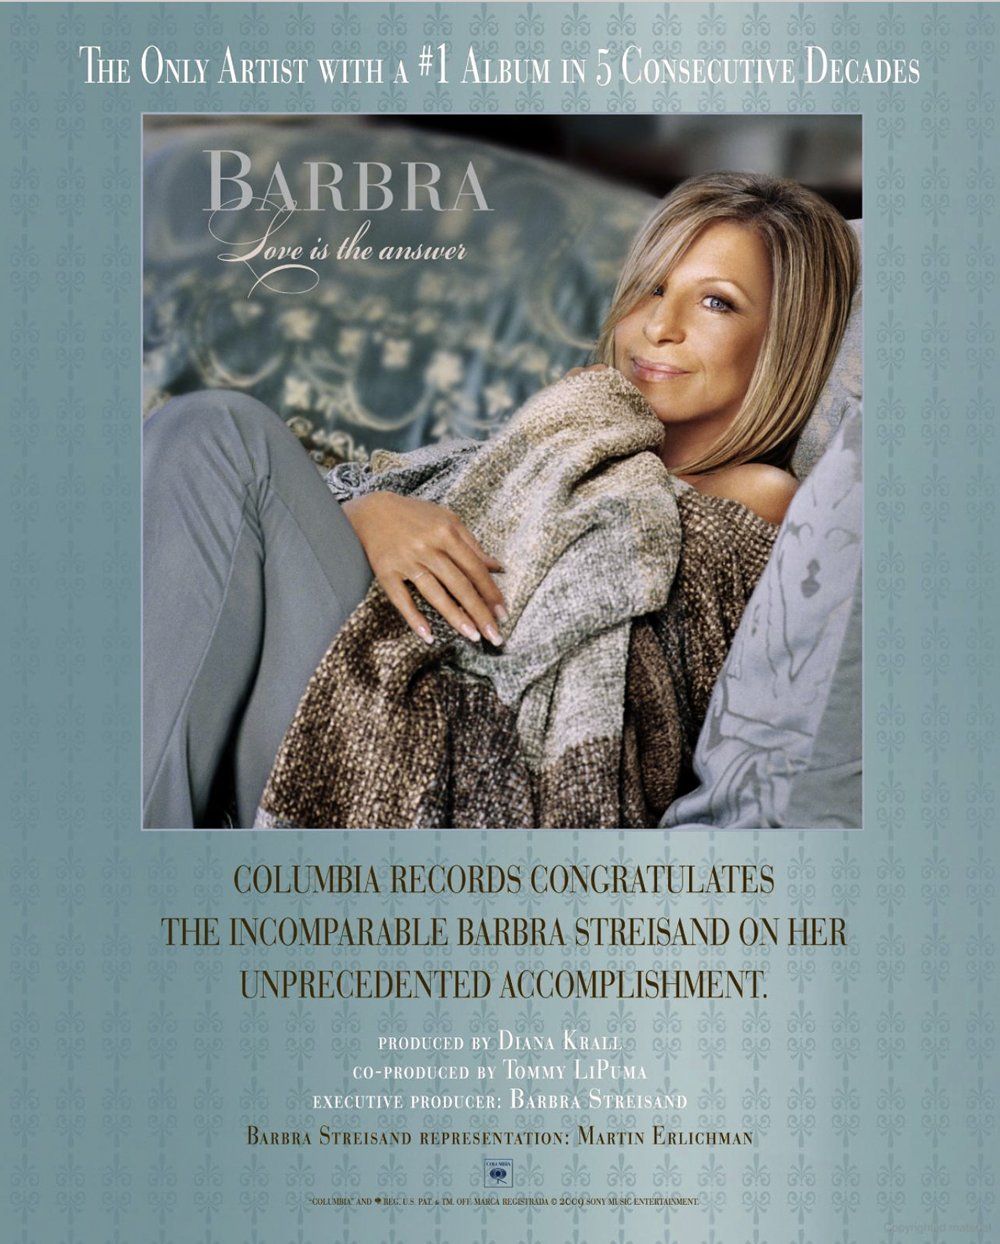 Congratulatory ad from Columbia Records on Barbra's album debuting at #1